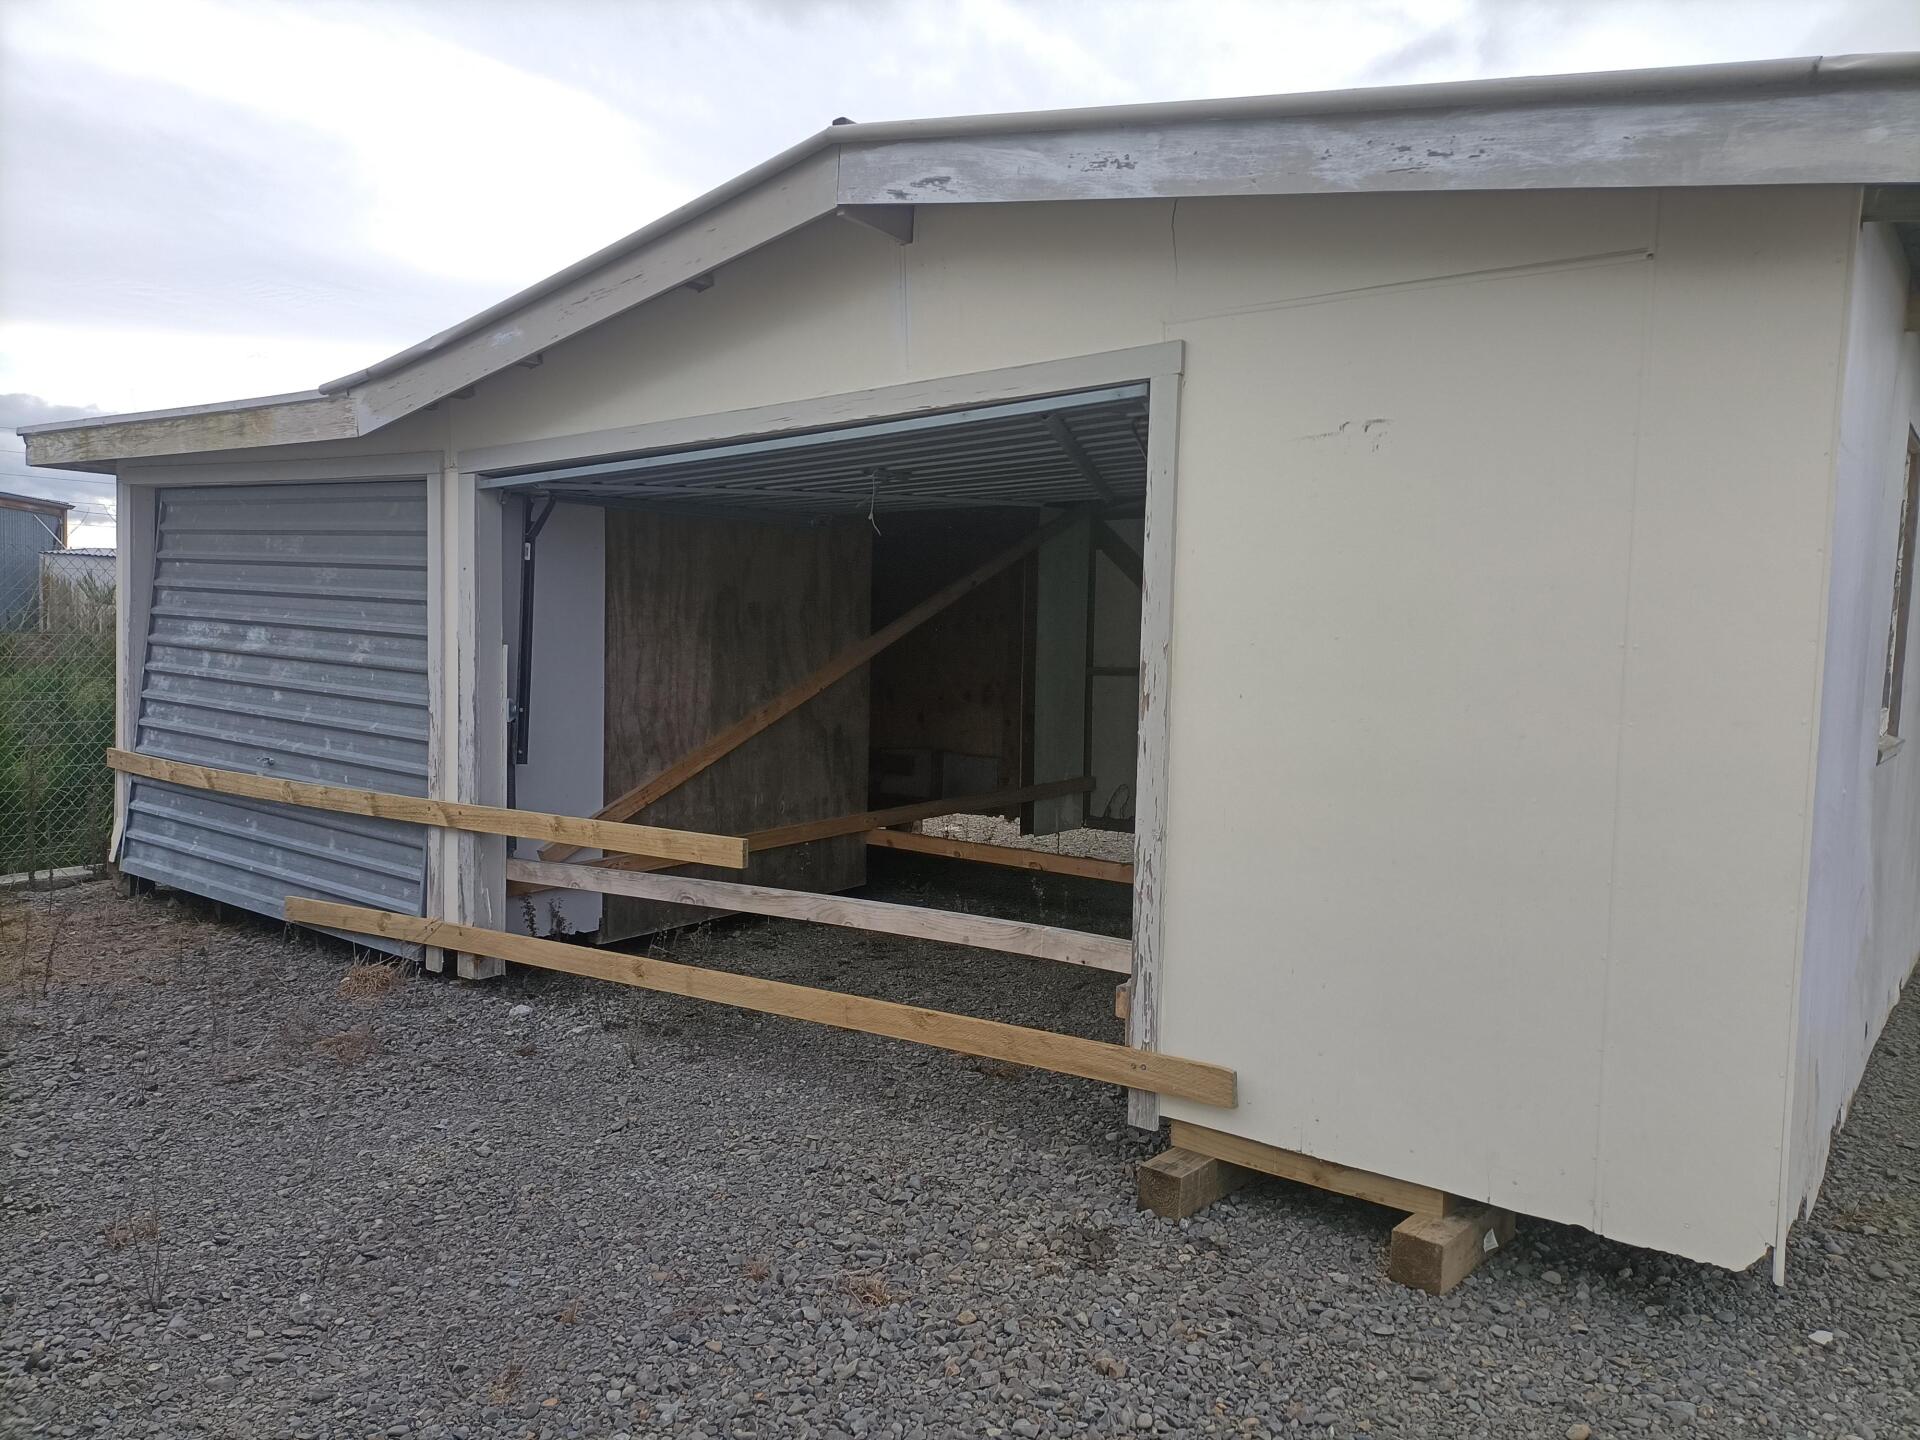 HB0046 - 2 door shed with extra space